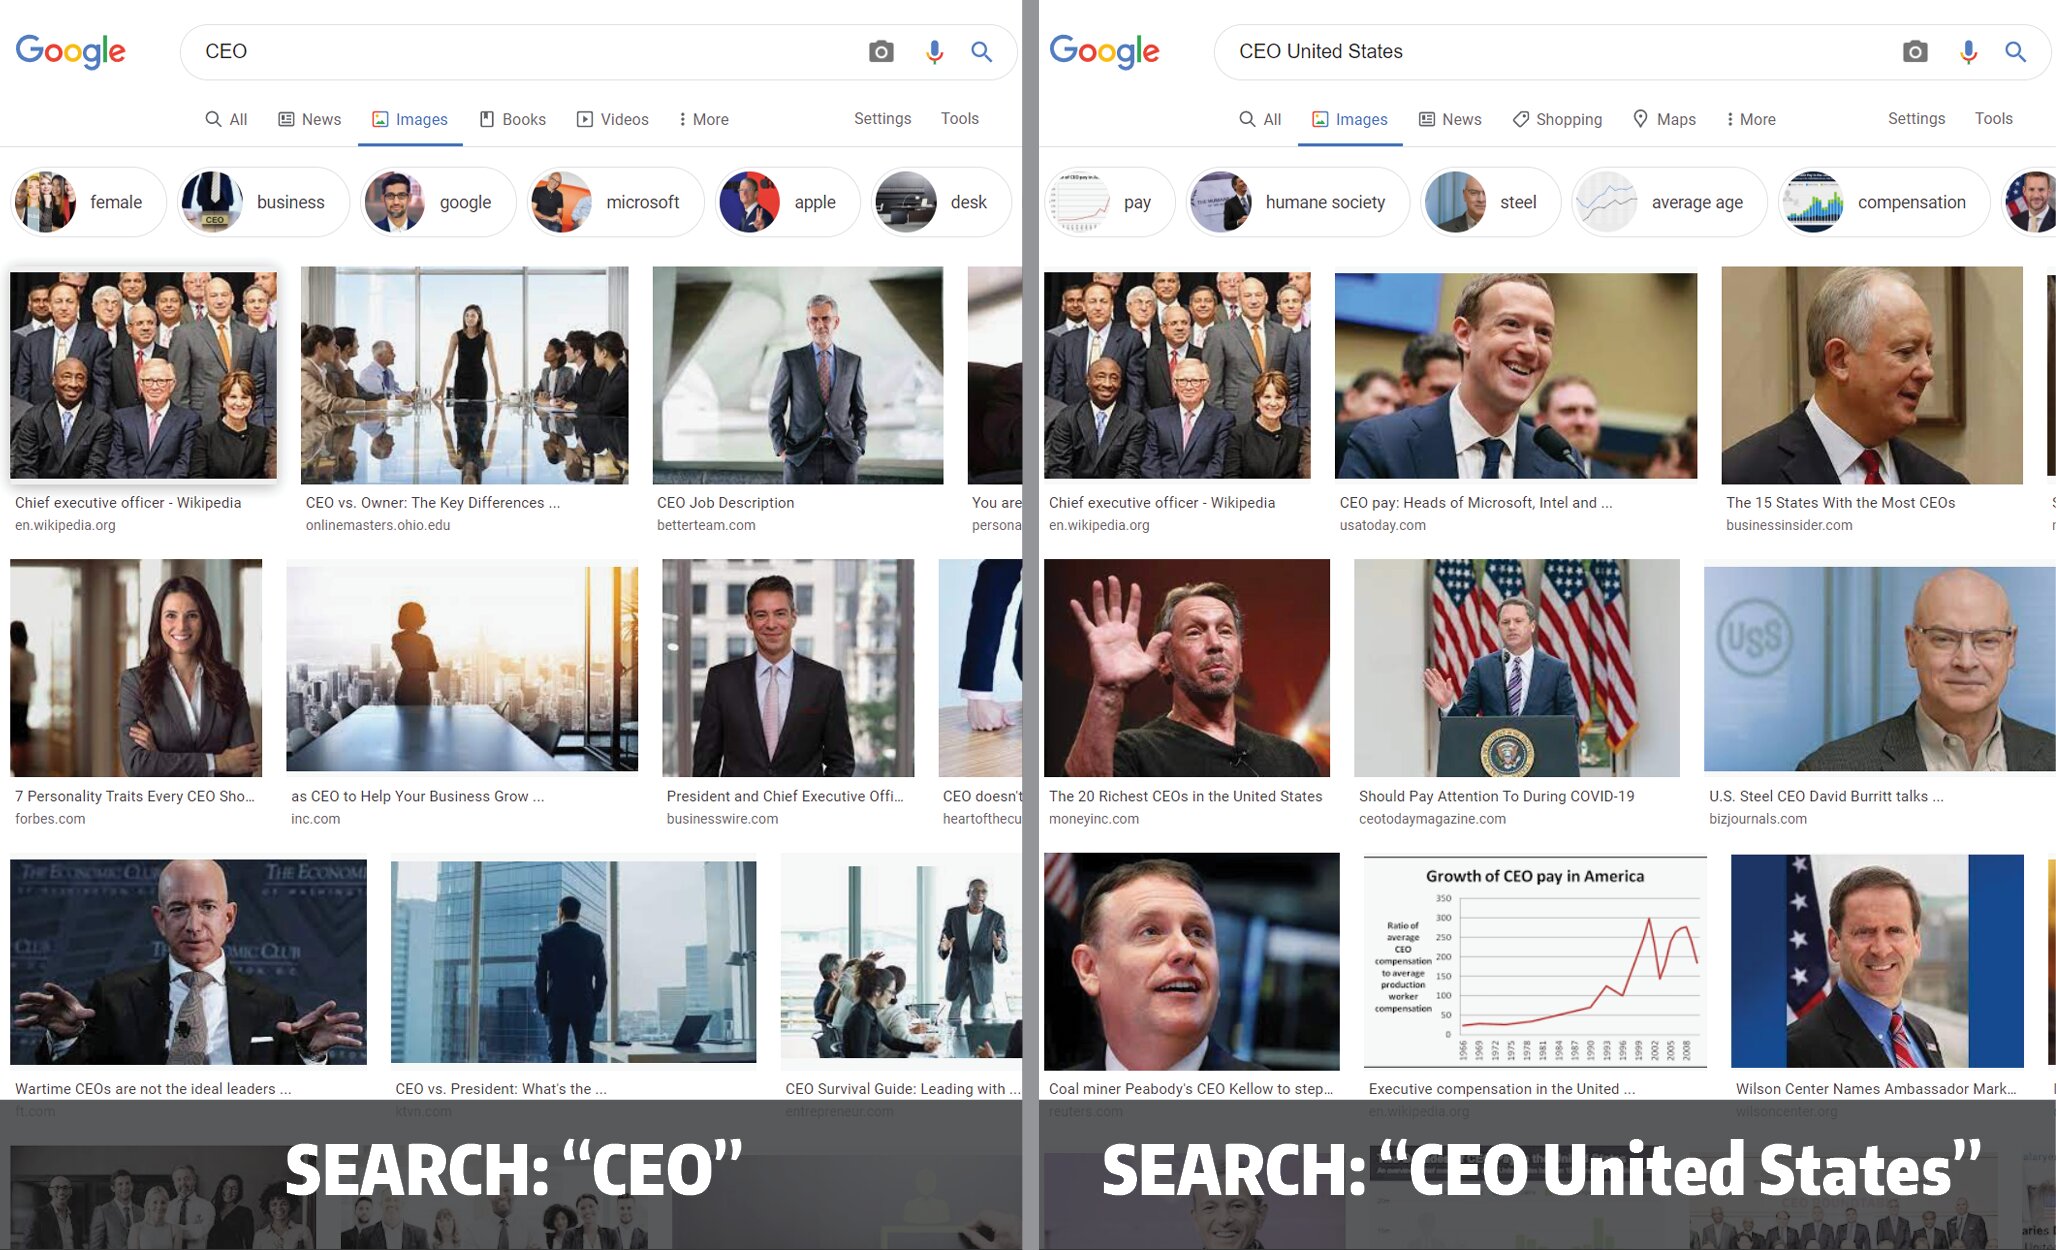 Google’s ‘CEO’ image search gender bias hasn’t really been fixed: study